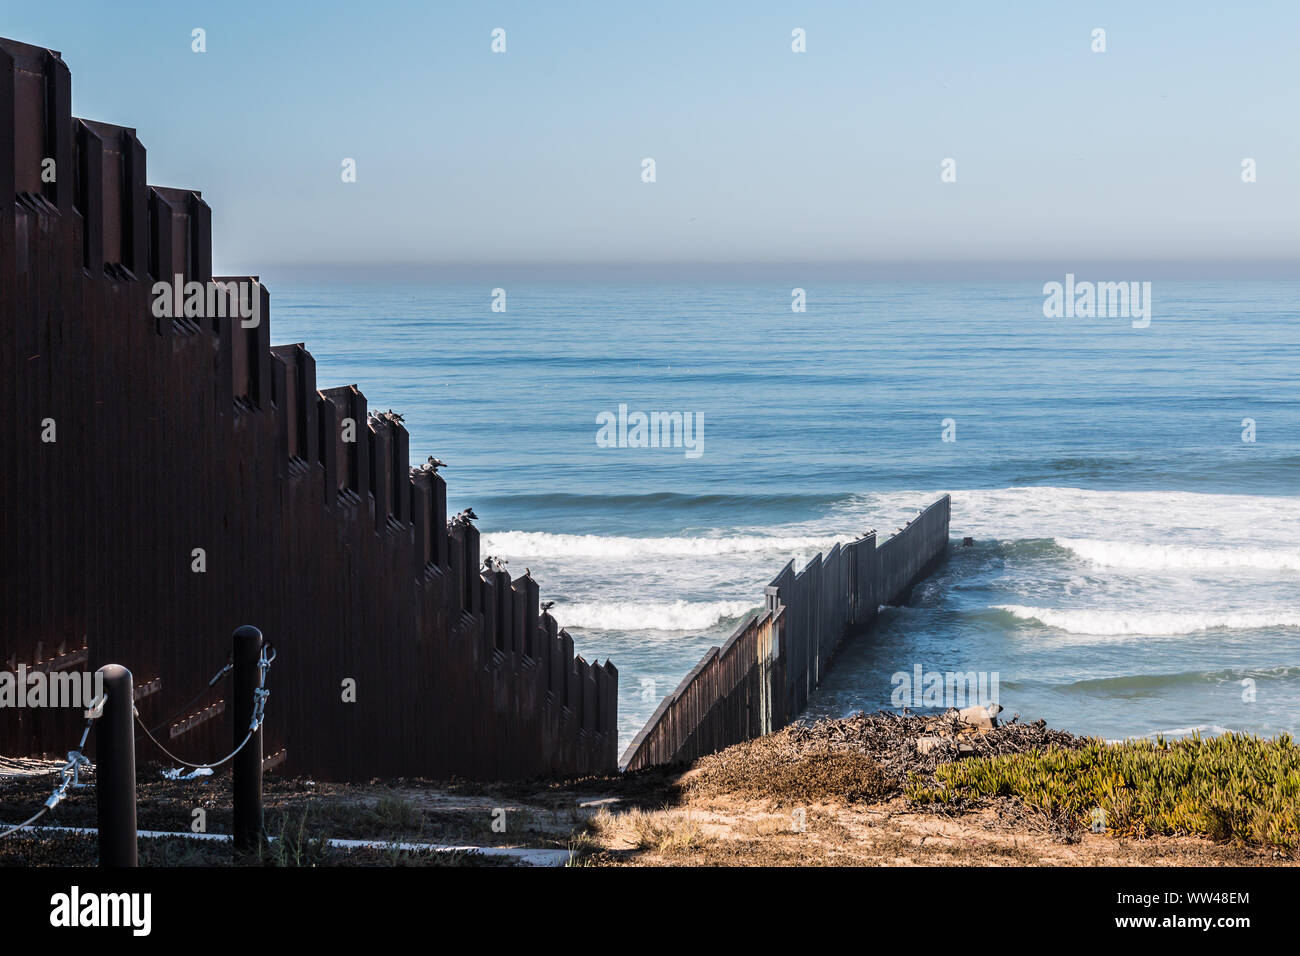 International border wall extending out into the Pacific ocean and separating San Diego, California from Tijuana, Mexico. Stock Photo